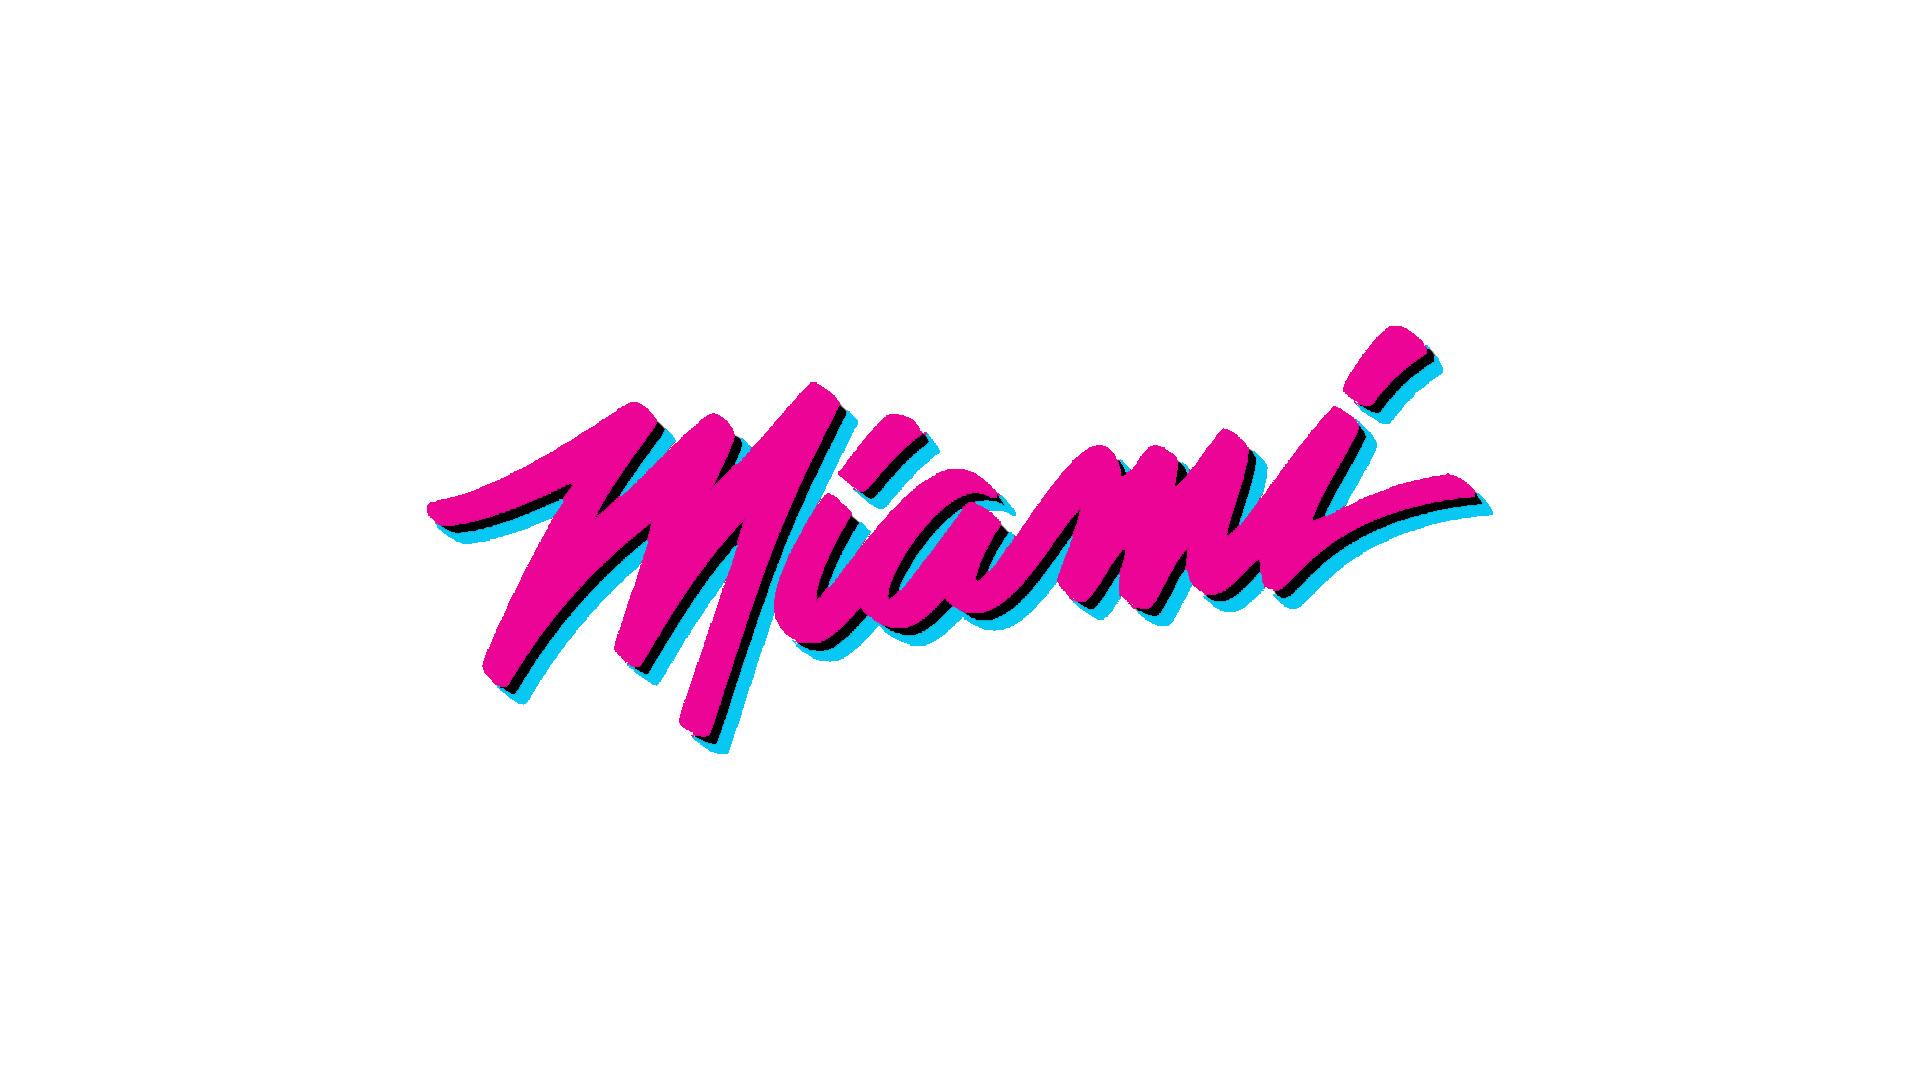 Miami Heat Vice Wallpapers - Top Free Miami Heat Vice Backgrounds